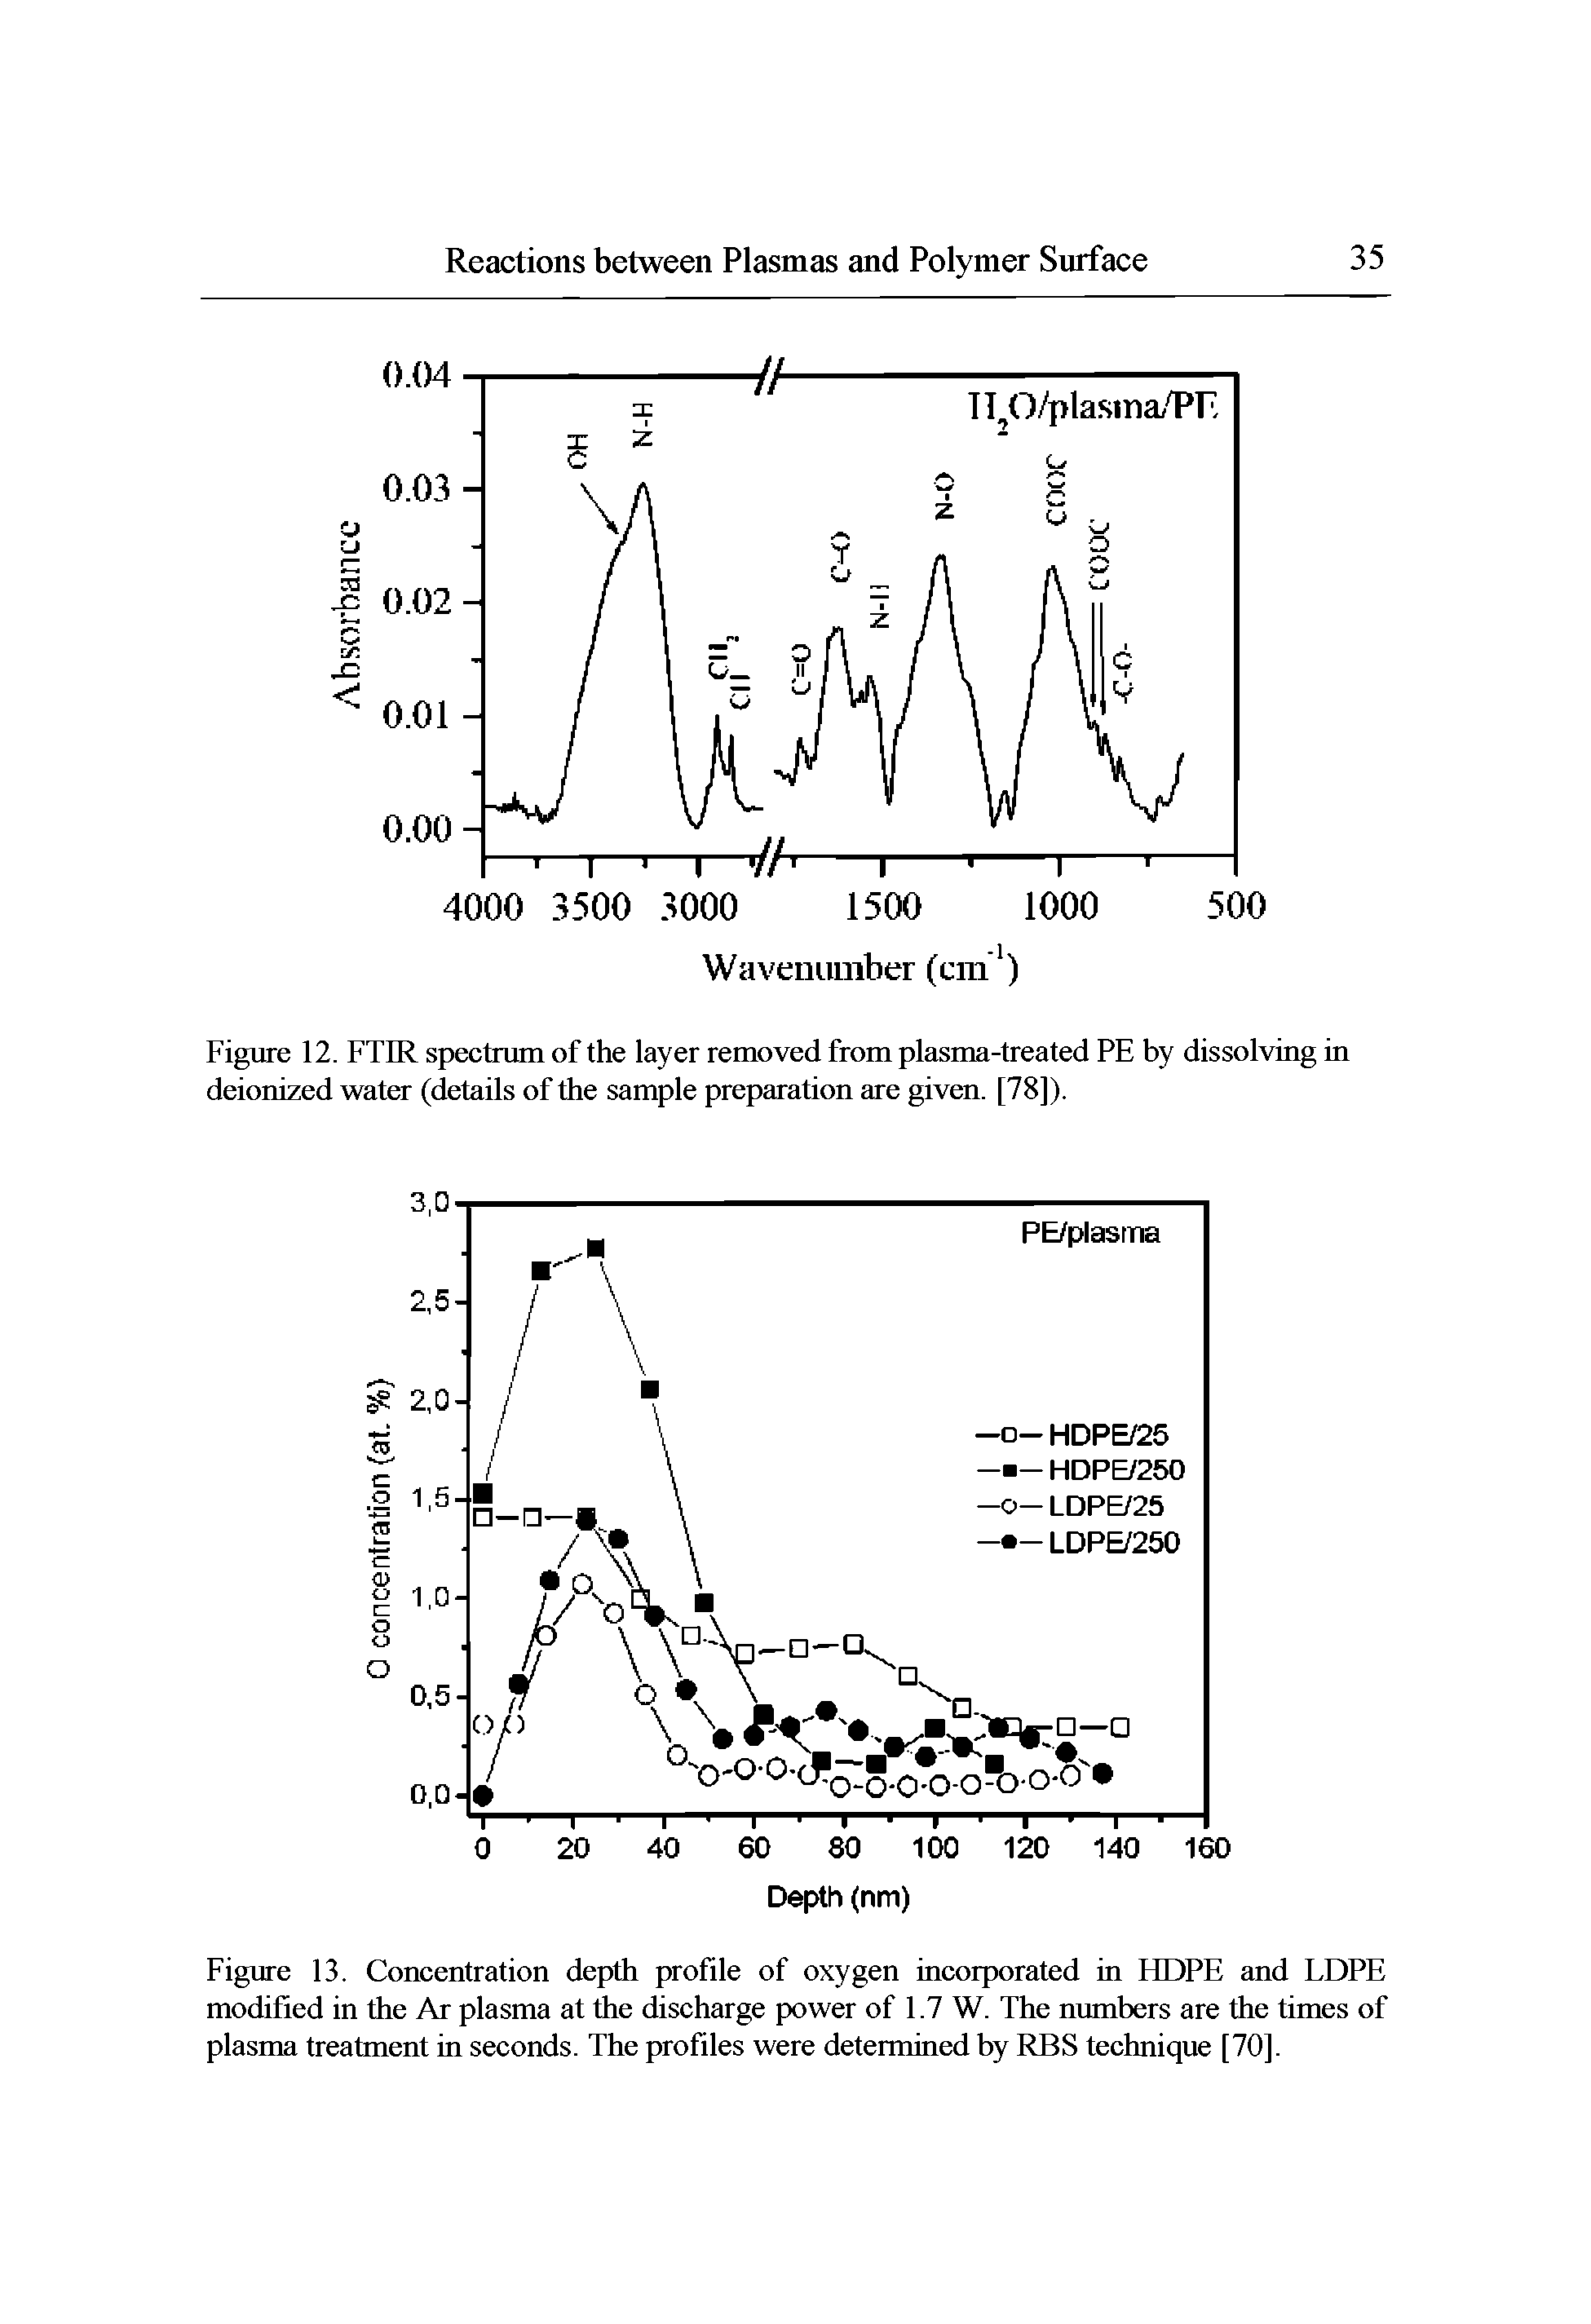 Figure 13. Concentration depth profile of oxygen incorporated in HOPE and LDPE modified in the Ar plasma at the discharge power of 1.7 W. The numbers are the times of plasma treatment in seconds. The profiles were determined by RBS technique [70].